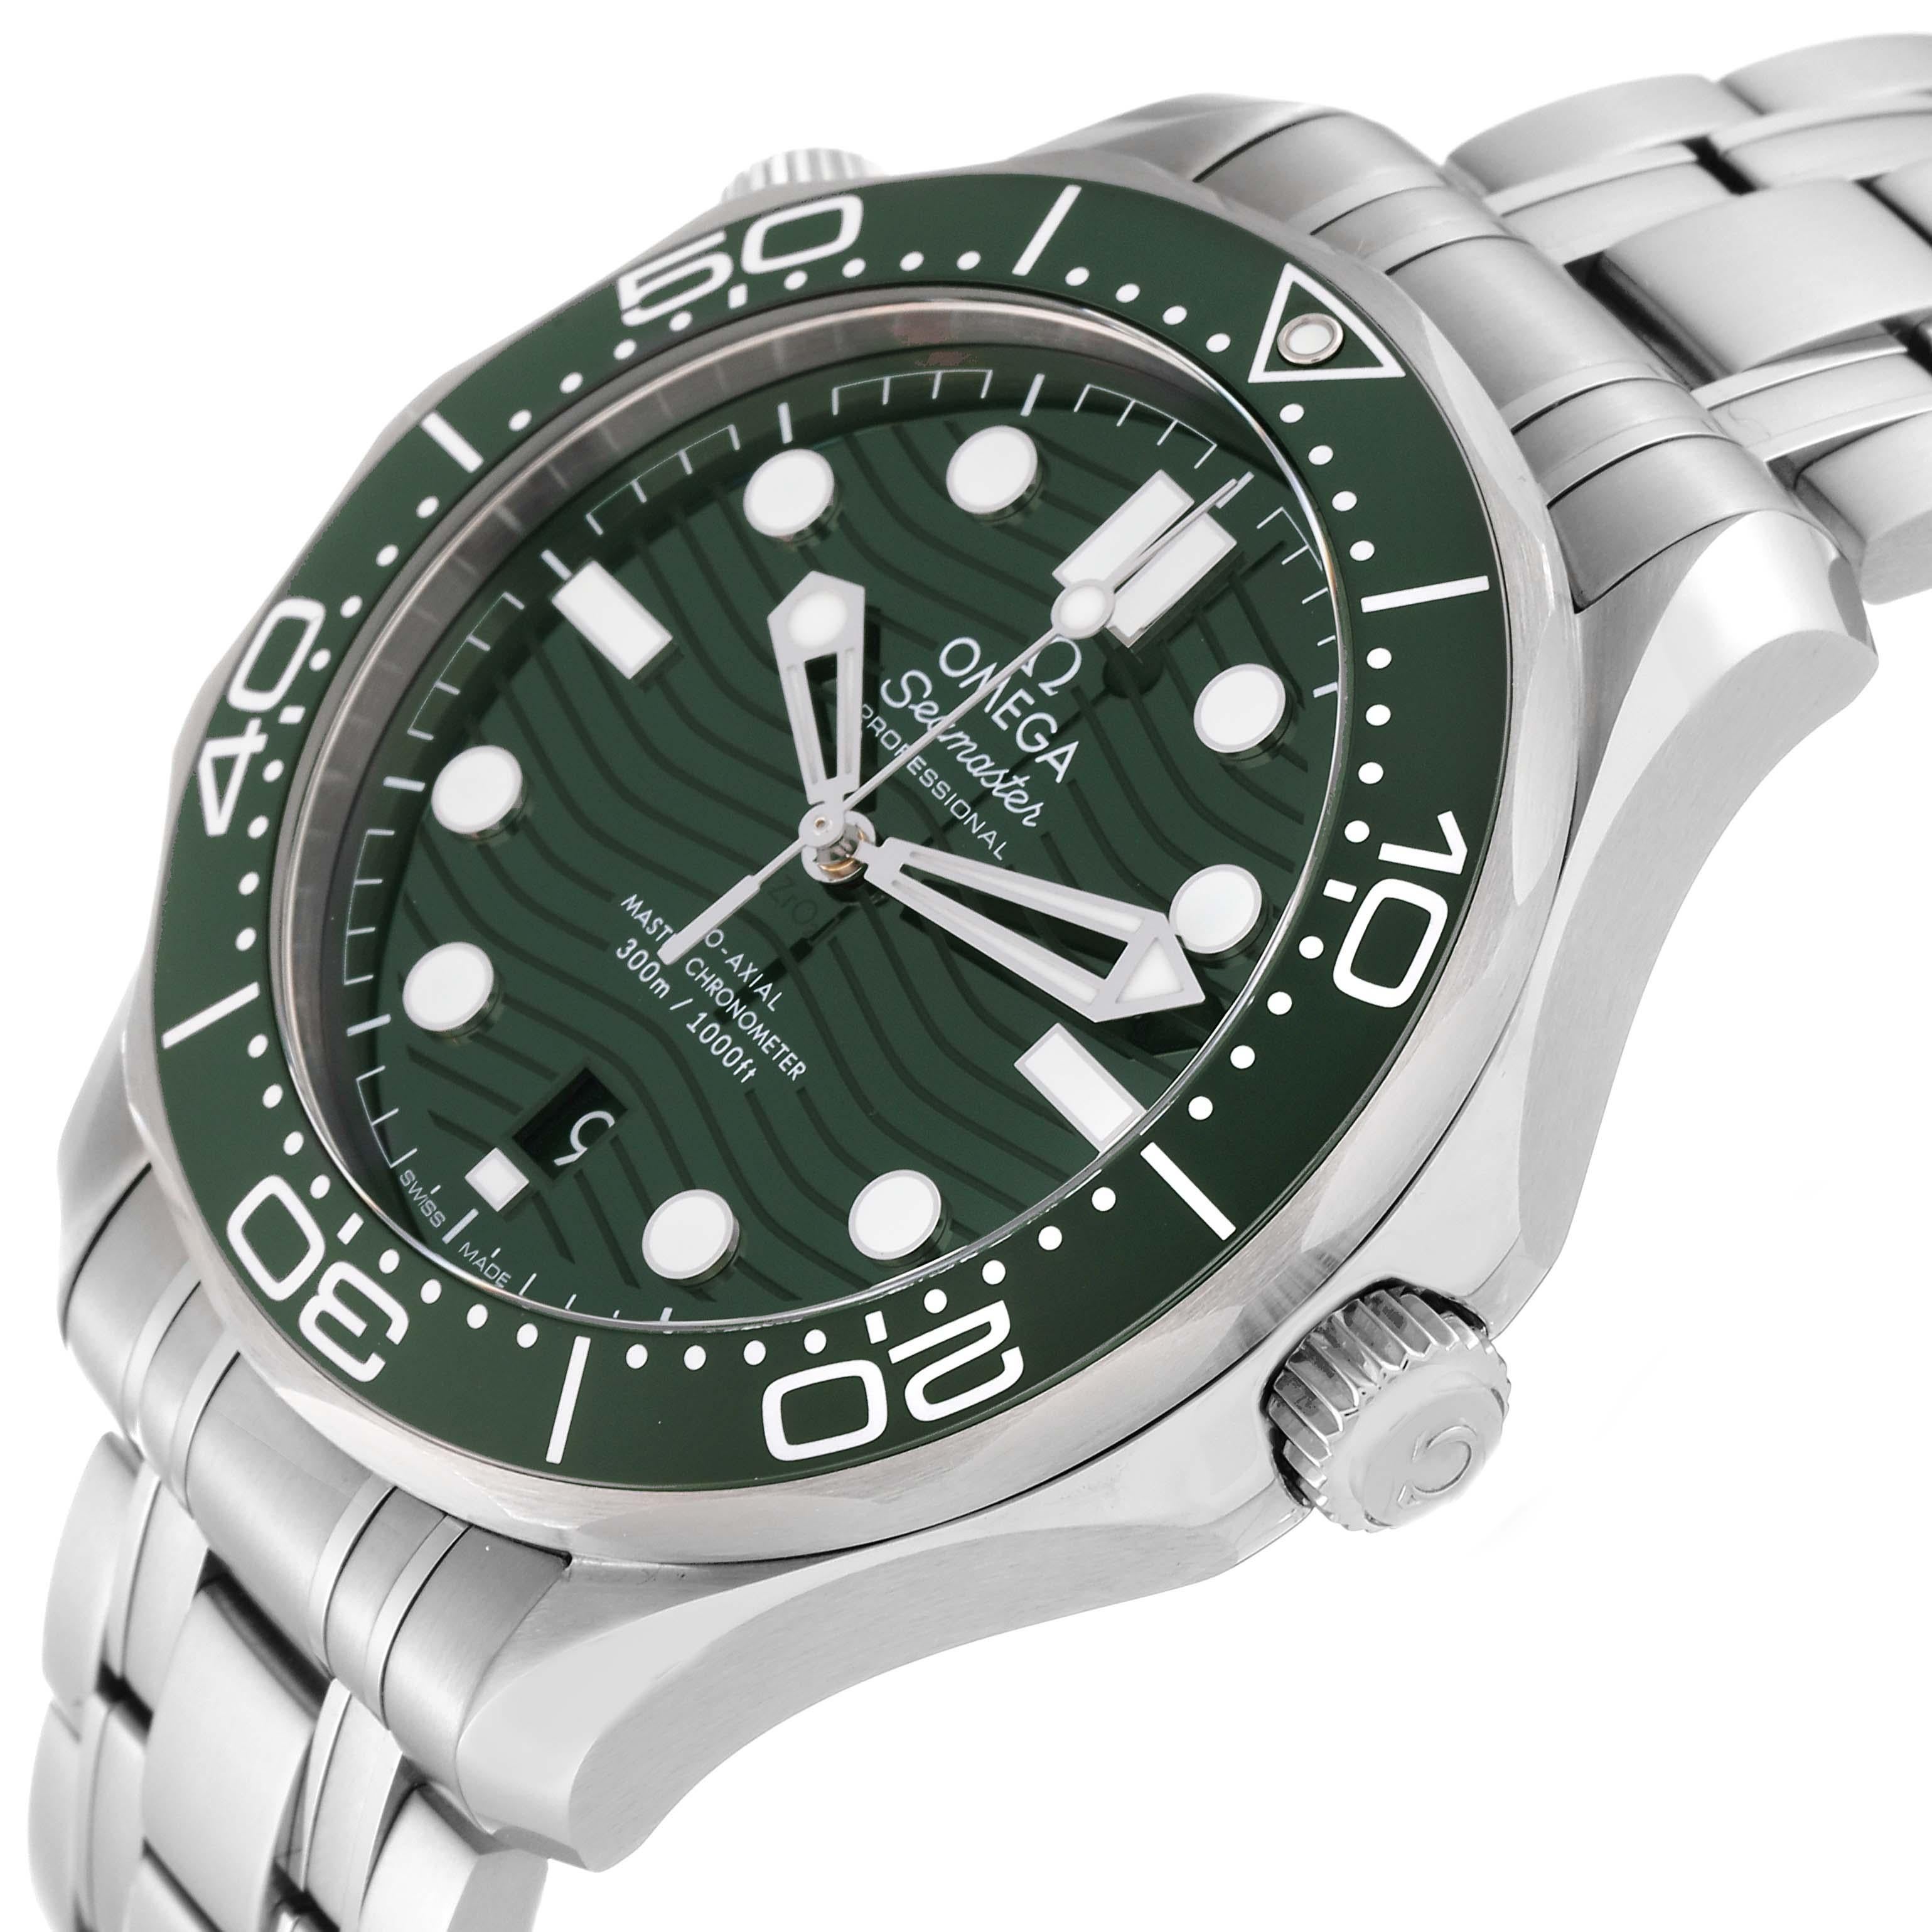 Omega Seamaster Diver Green Dial Steel Mens Watch 210.30.42.20.10.001 Box Card 1